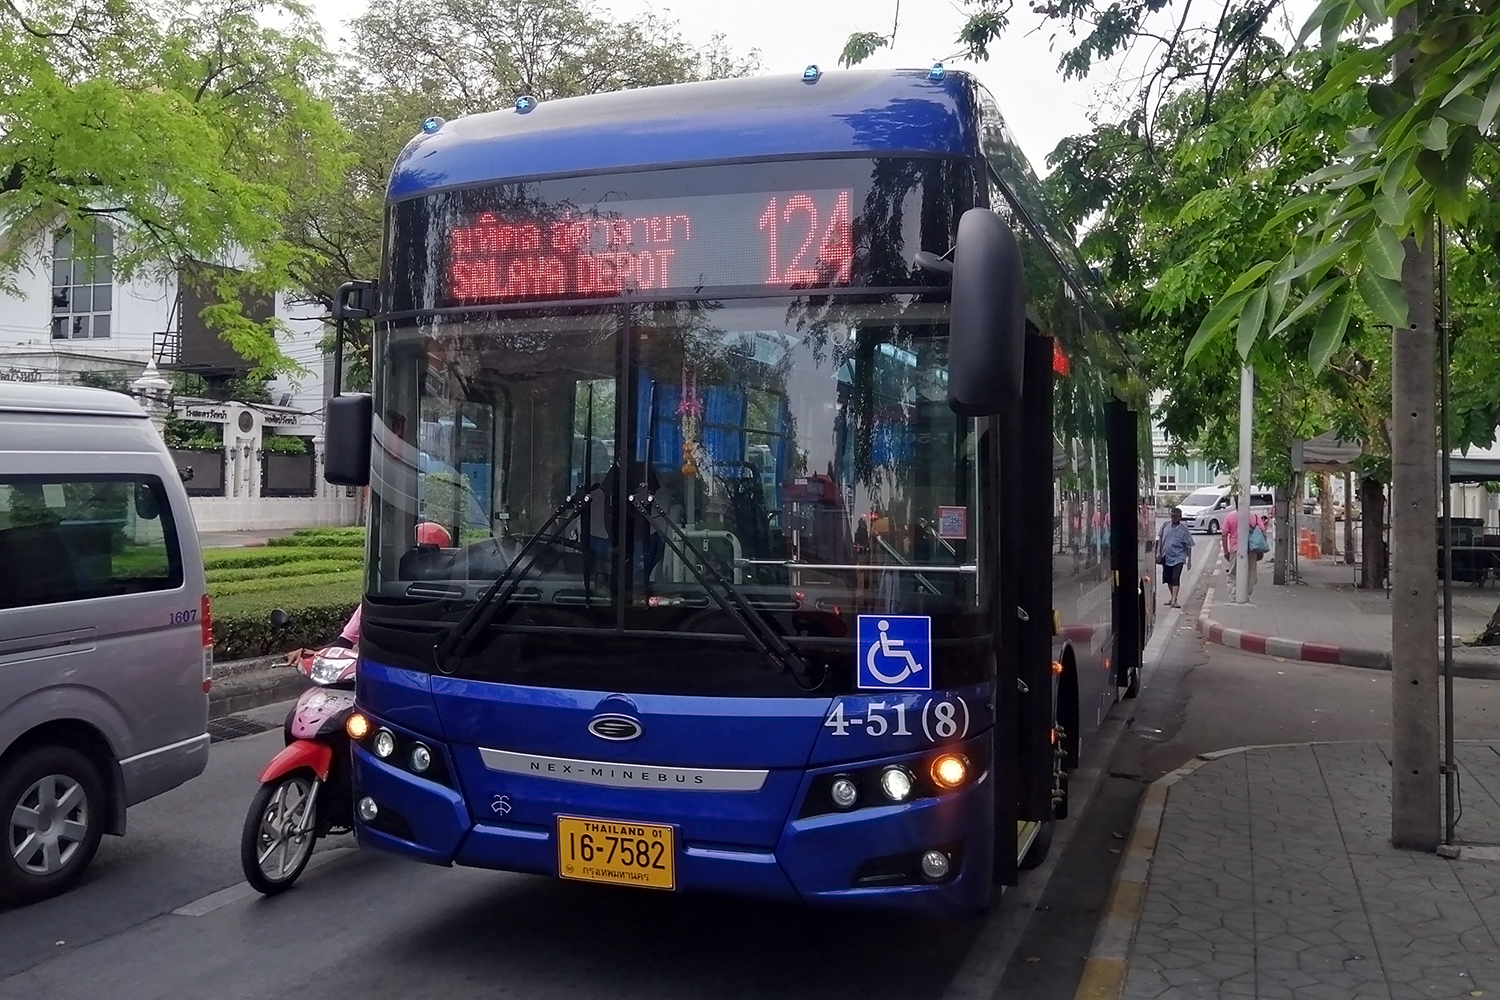 A blue bus on the street